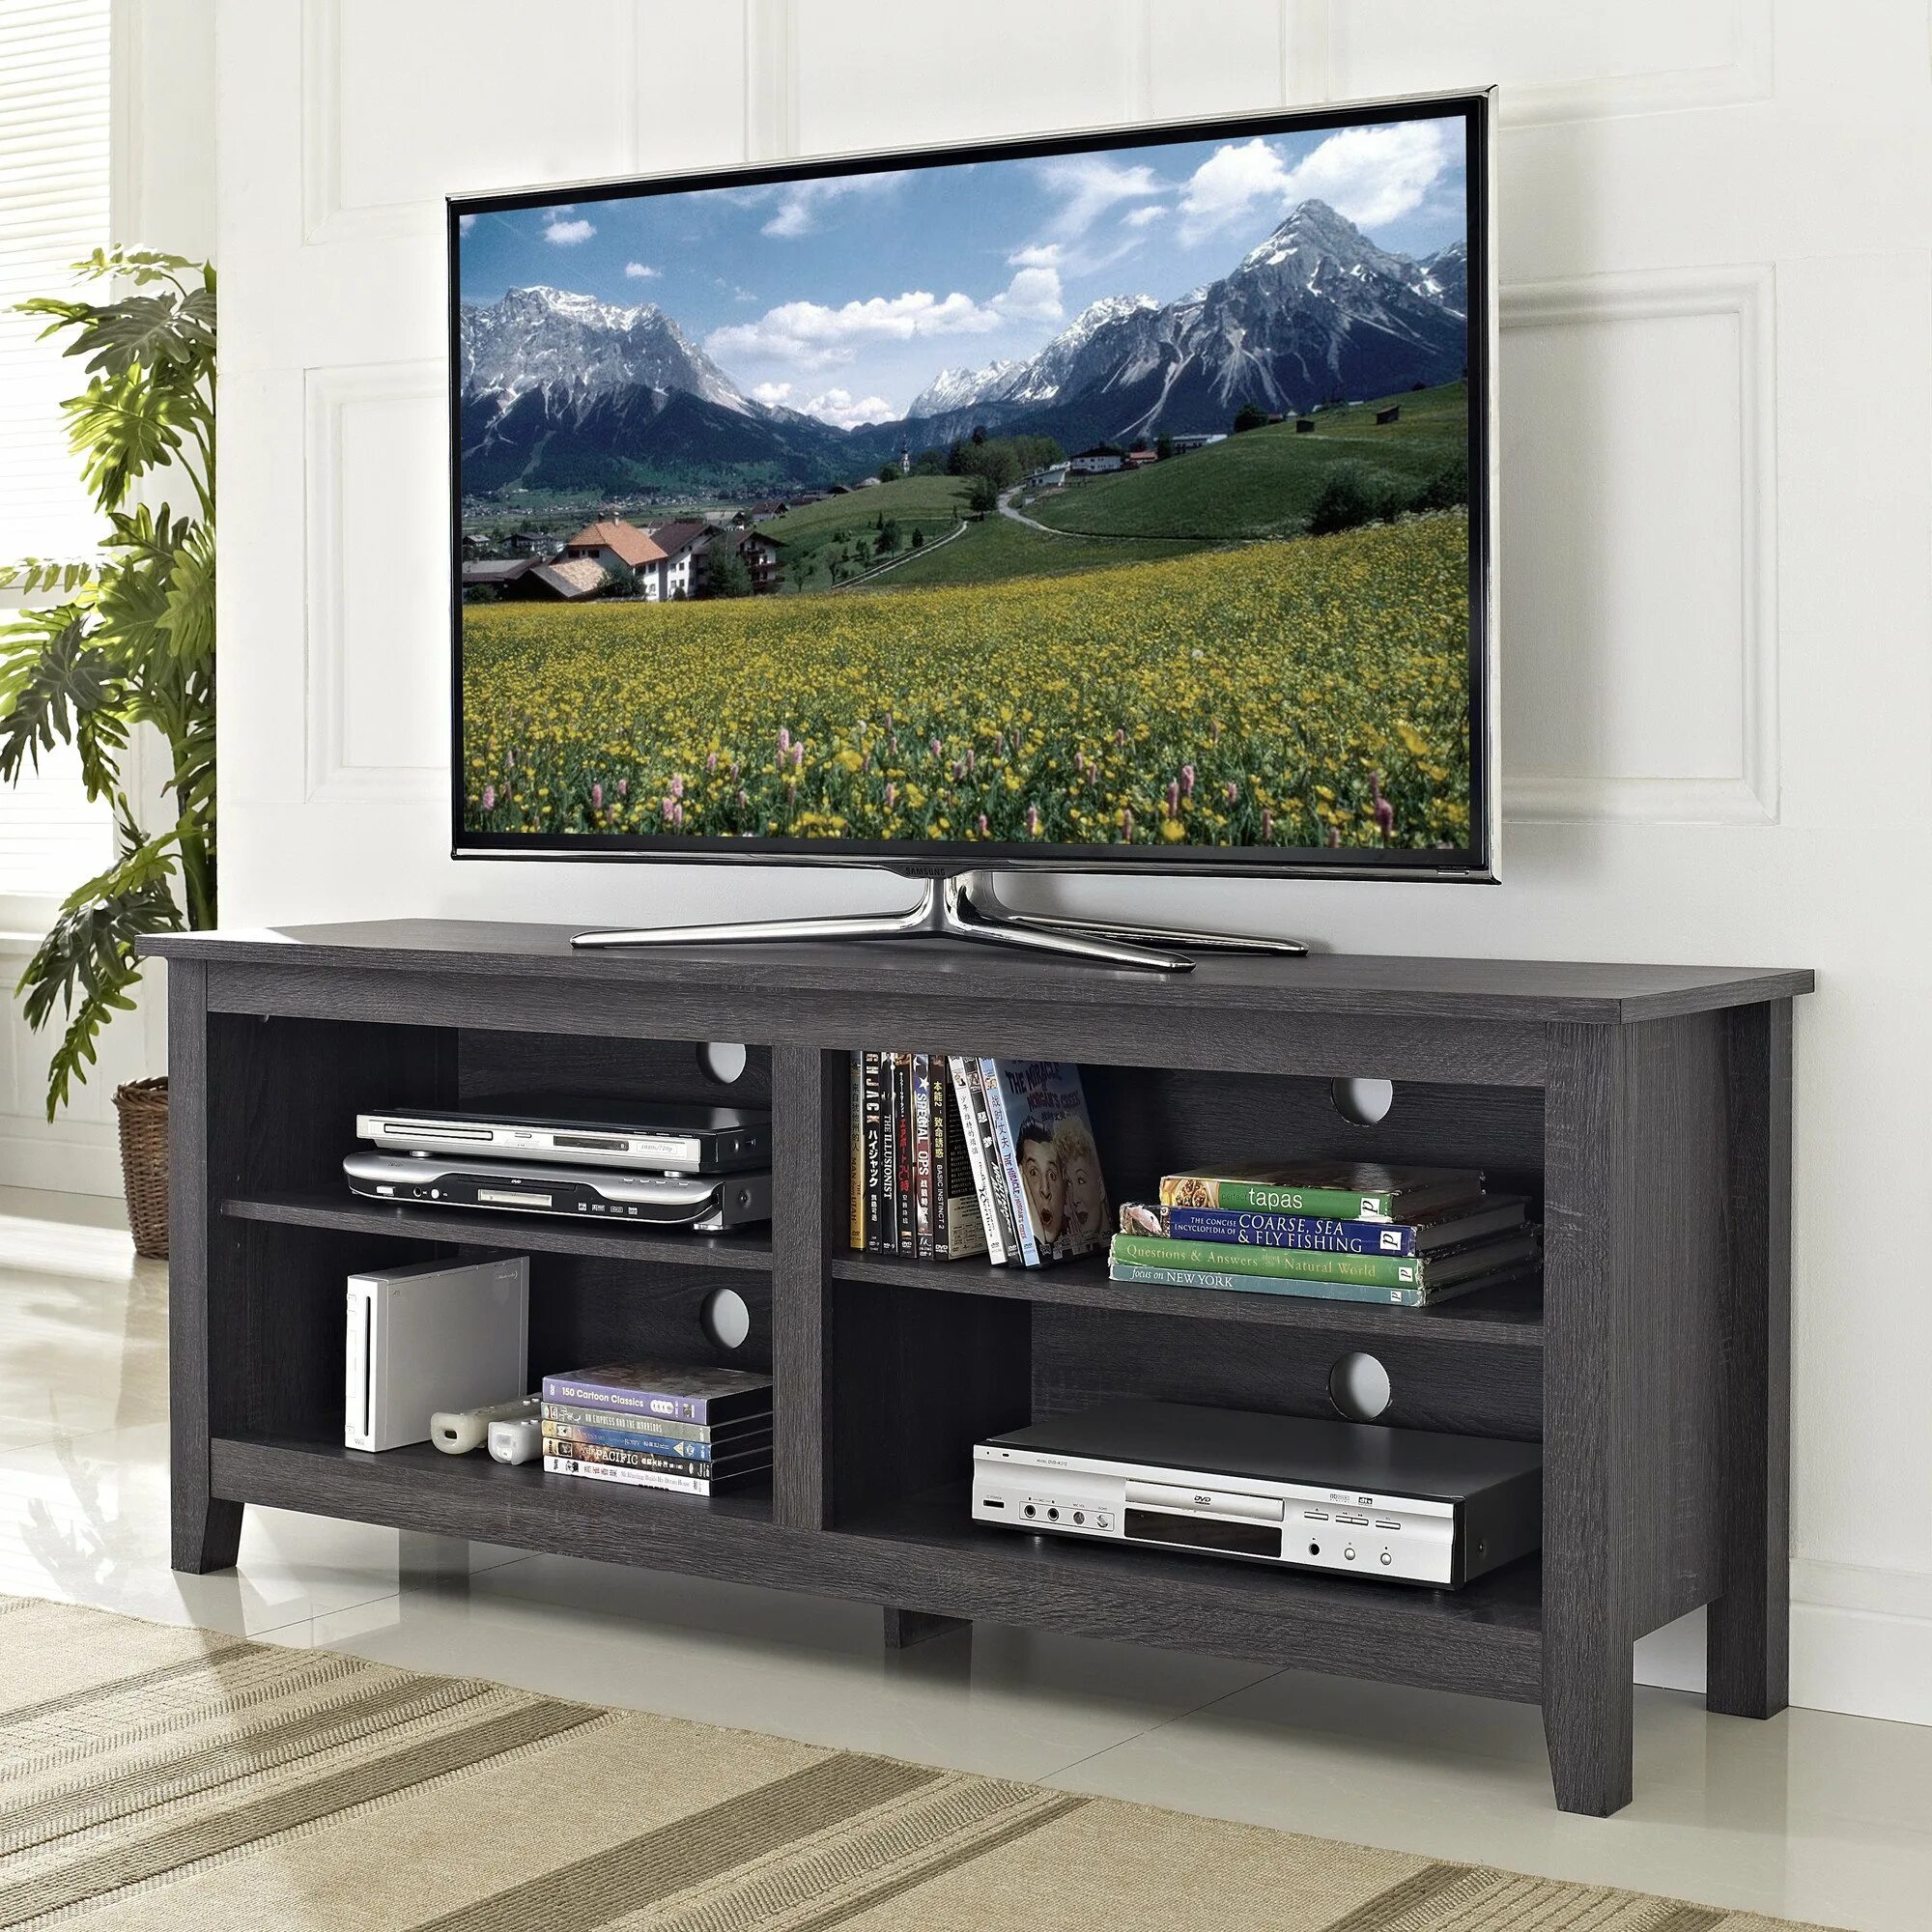 Media stand. Wood TV Stand. All Wood TV Stand. TV Stand images. TV Stand Night.